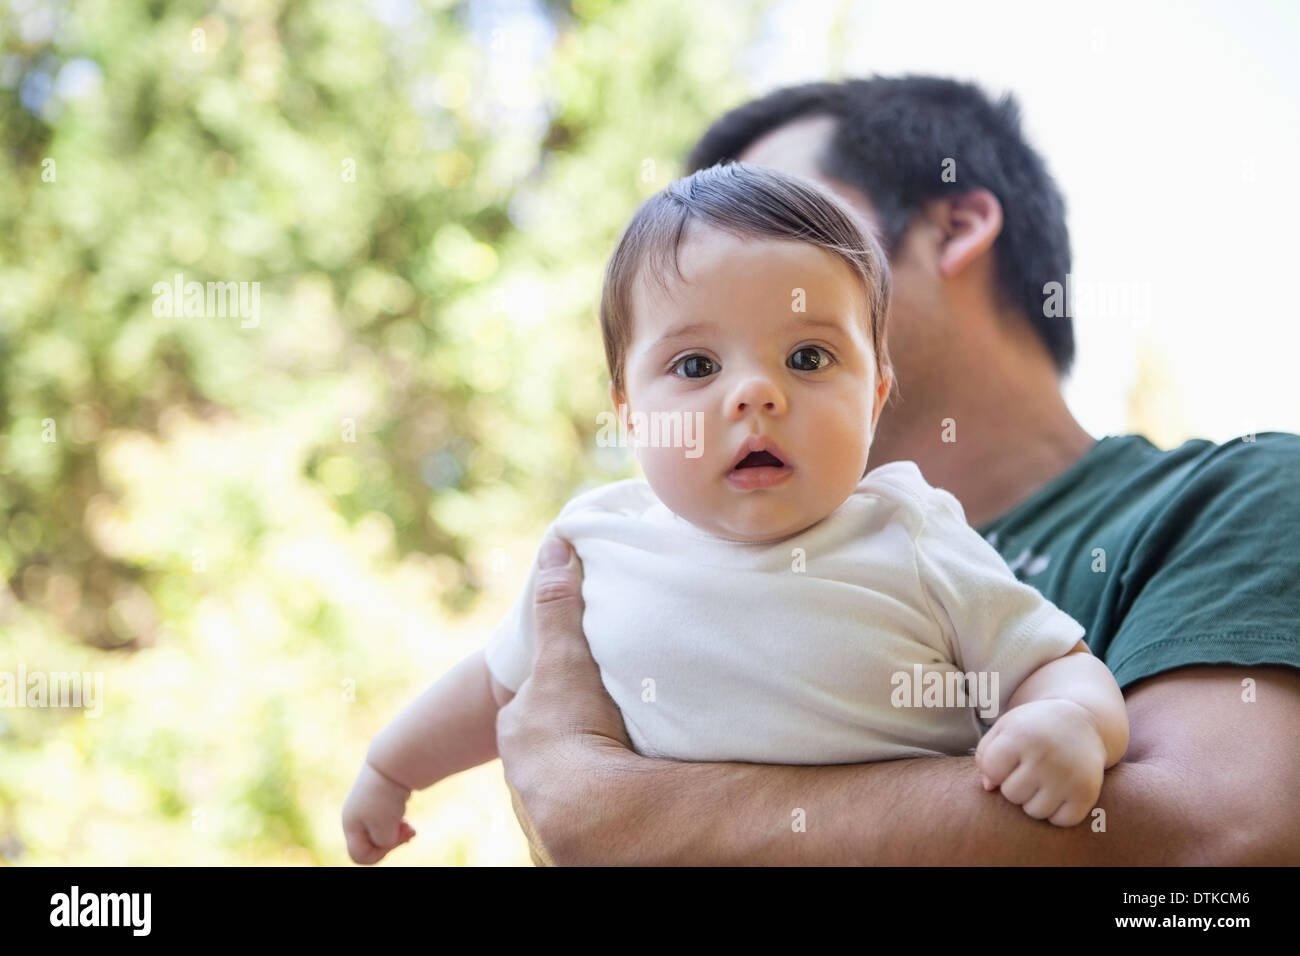 Father carrying baby girl outdoors Stock Photo